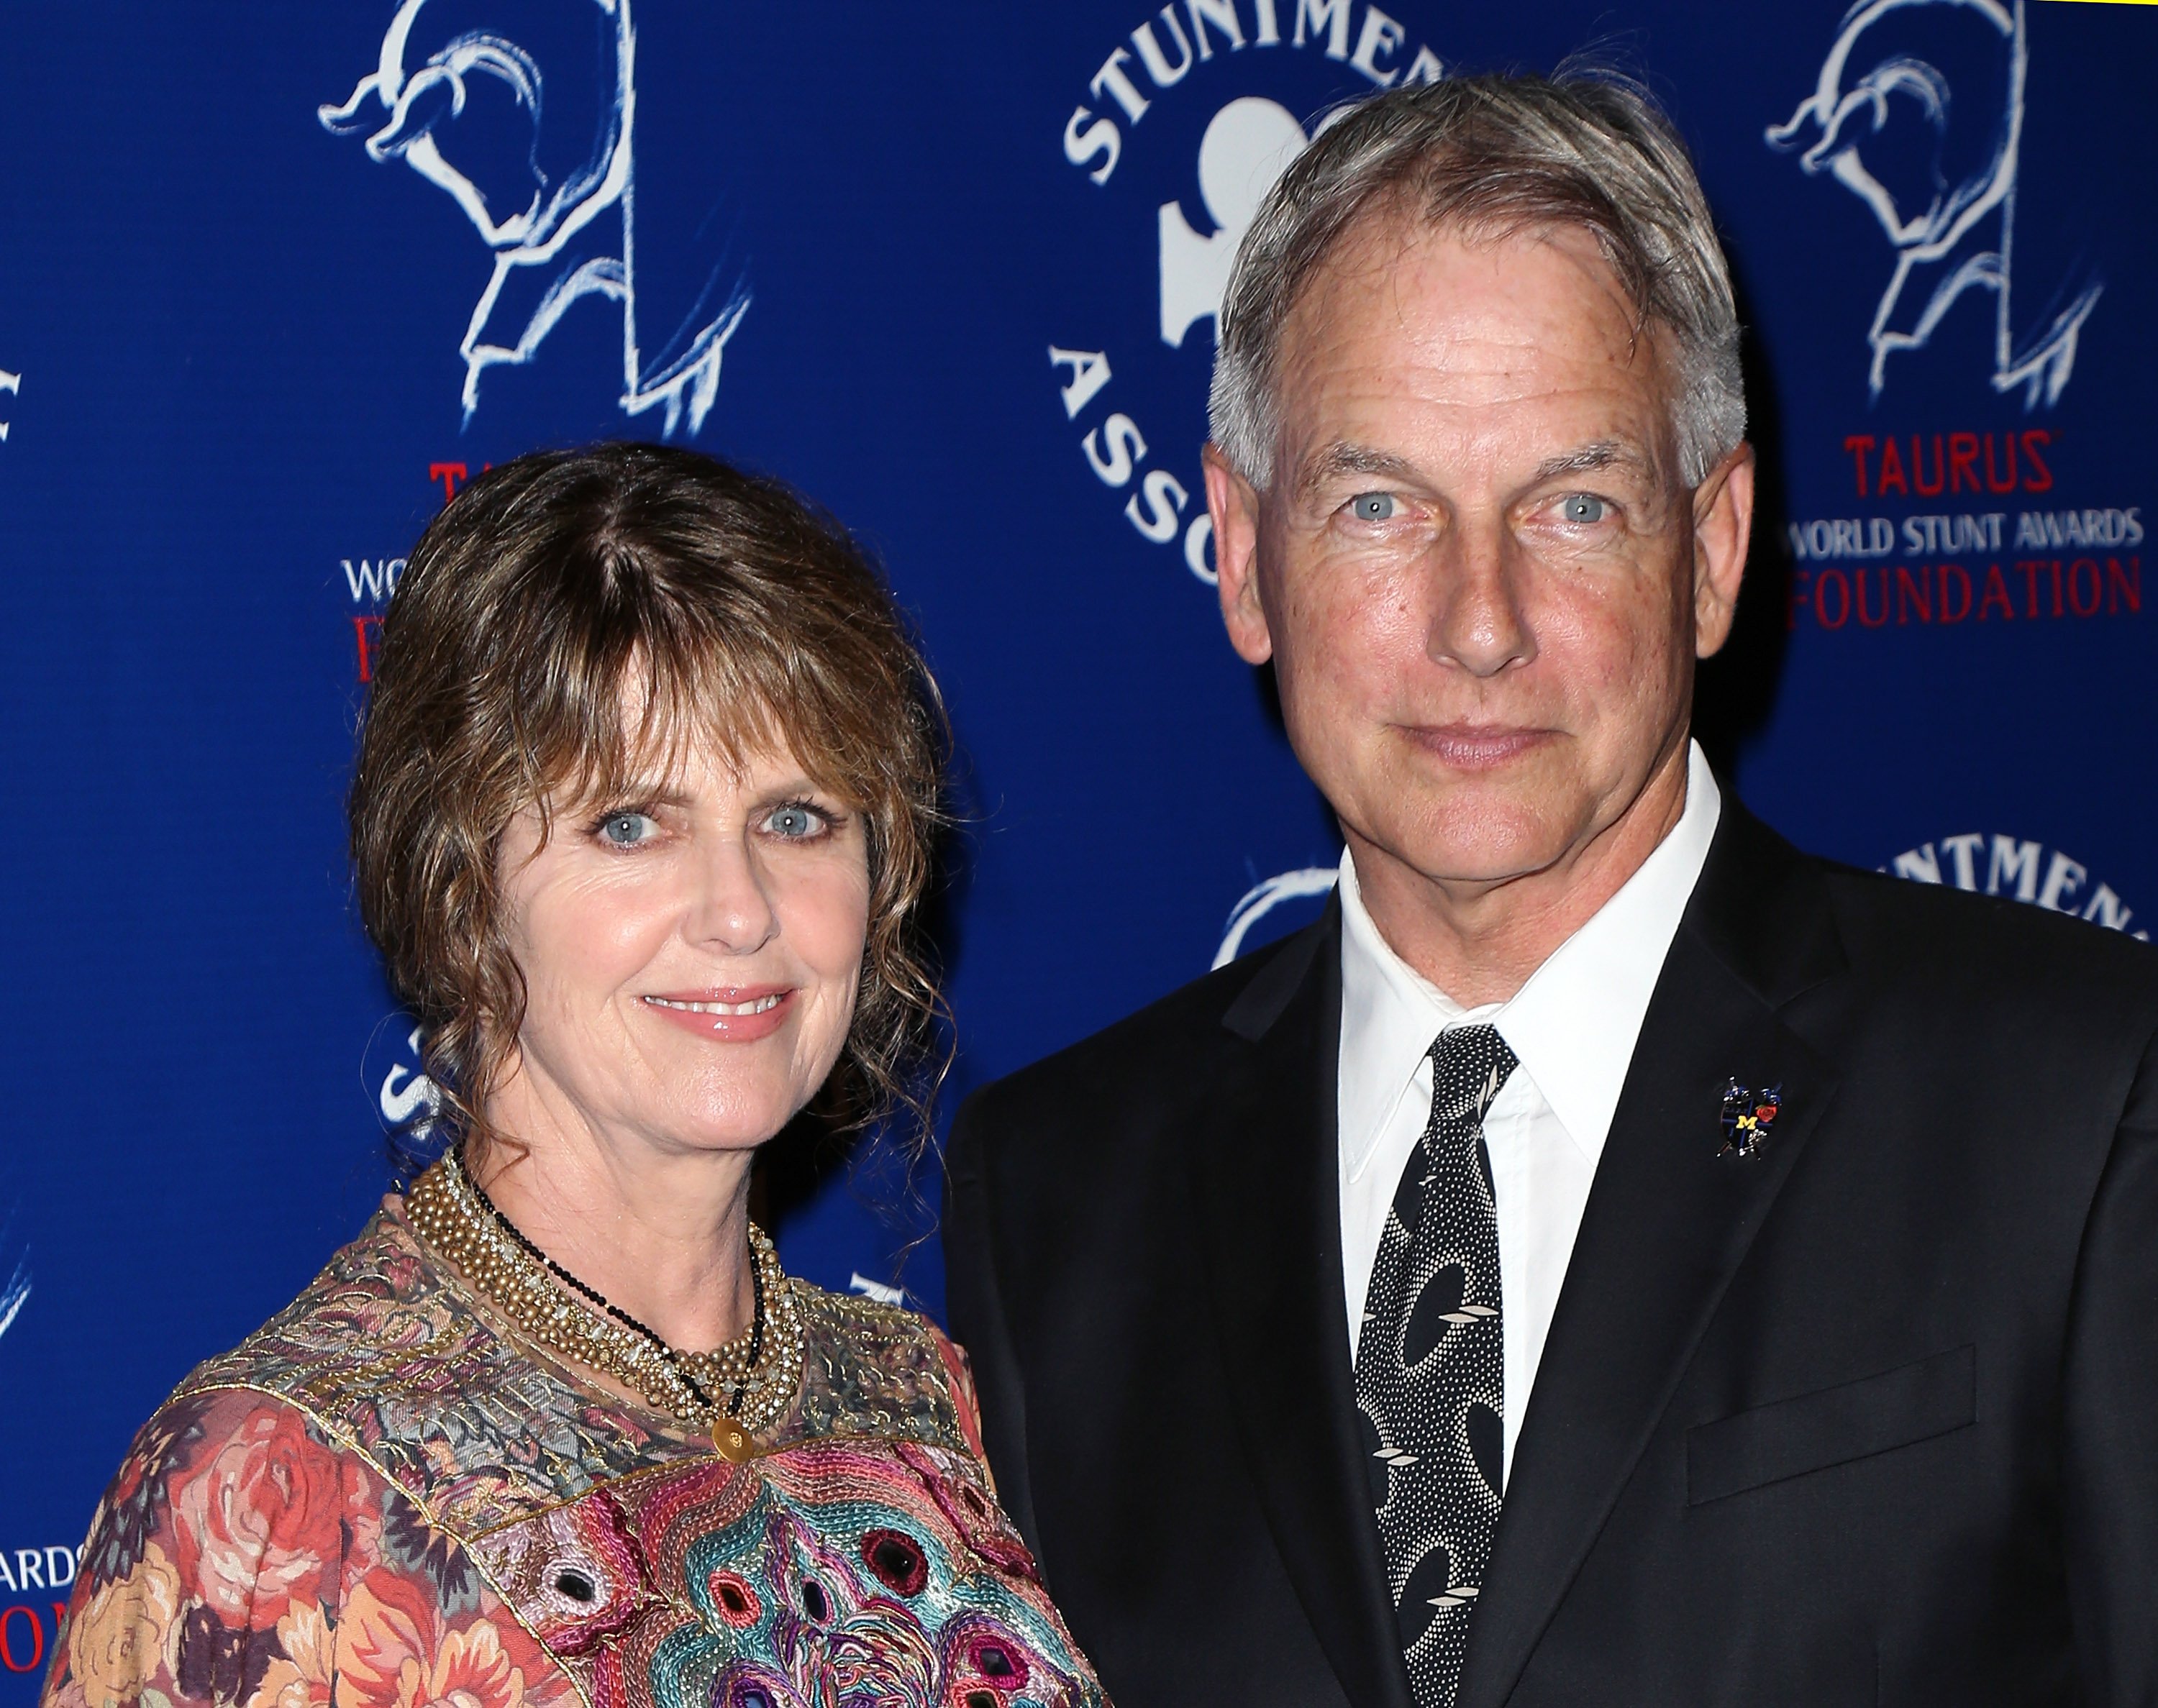 Pam Dawber and Mark Harmon attend the Stuntmen's Association of Motion Pictures 52nd Annual Awards at the Hilton Universal City on September 14, 2013 in Universal City, California | Source: Getty Images